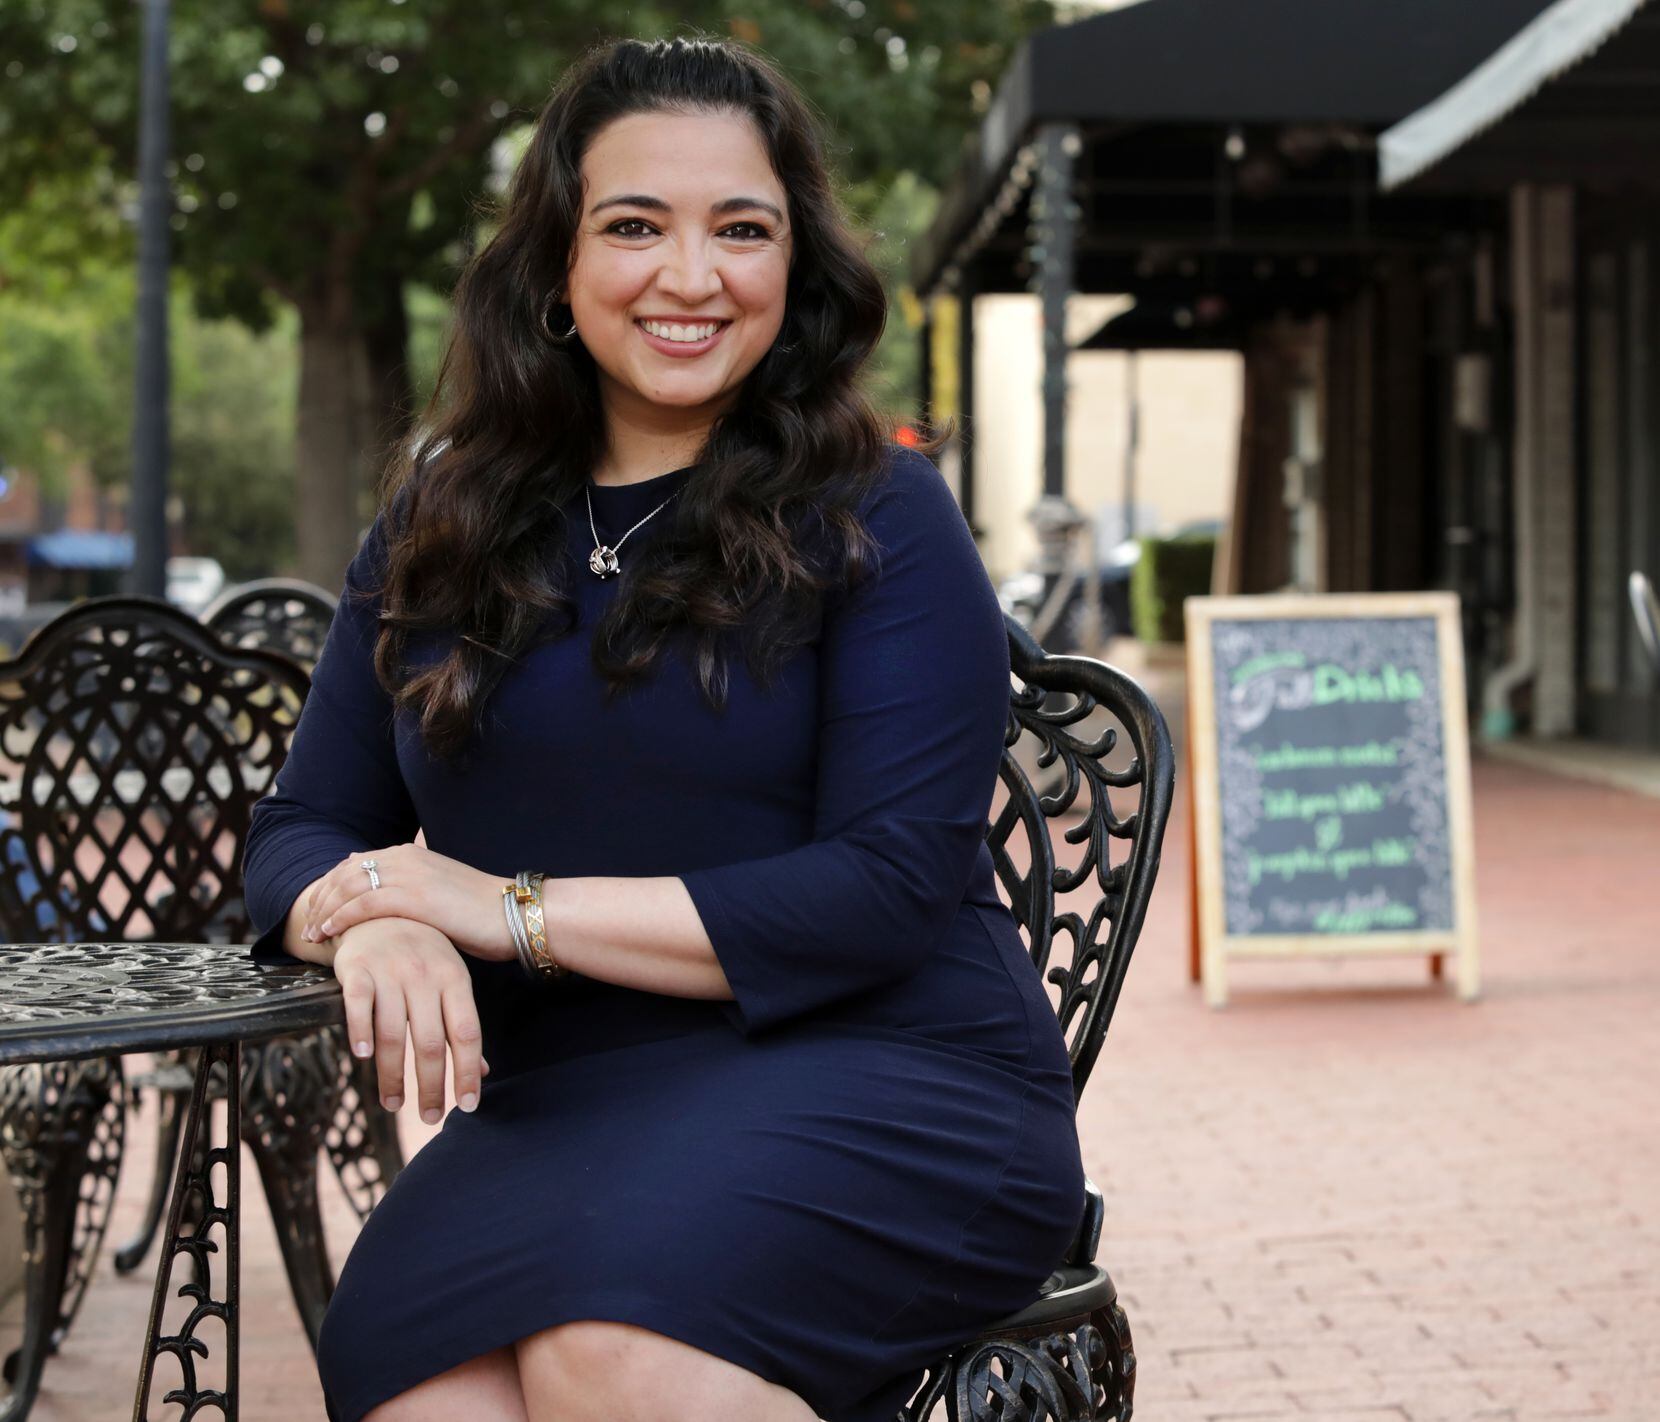 Lulu Seikaly photographed in downtown Plano, TX, on Sep. 17, 2020. (Jason Janik/Special Contributor)